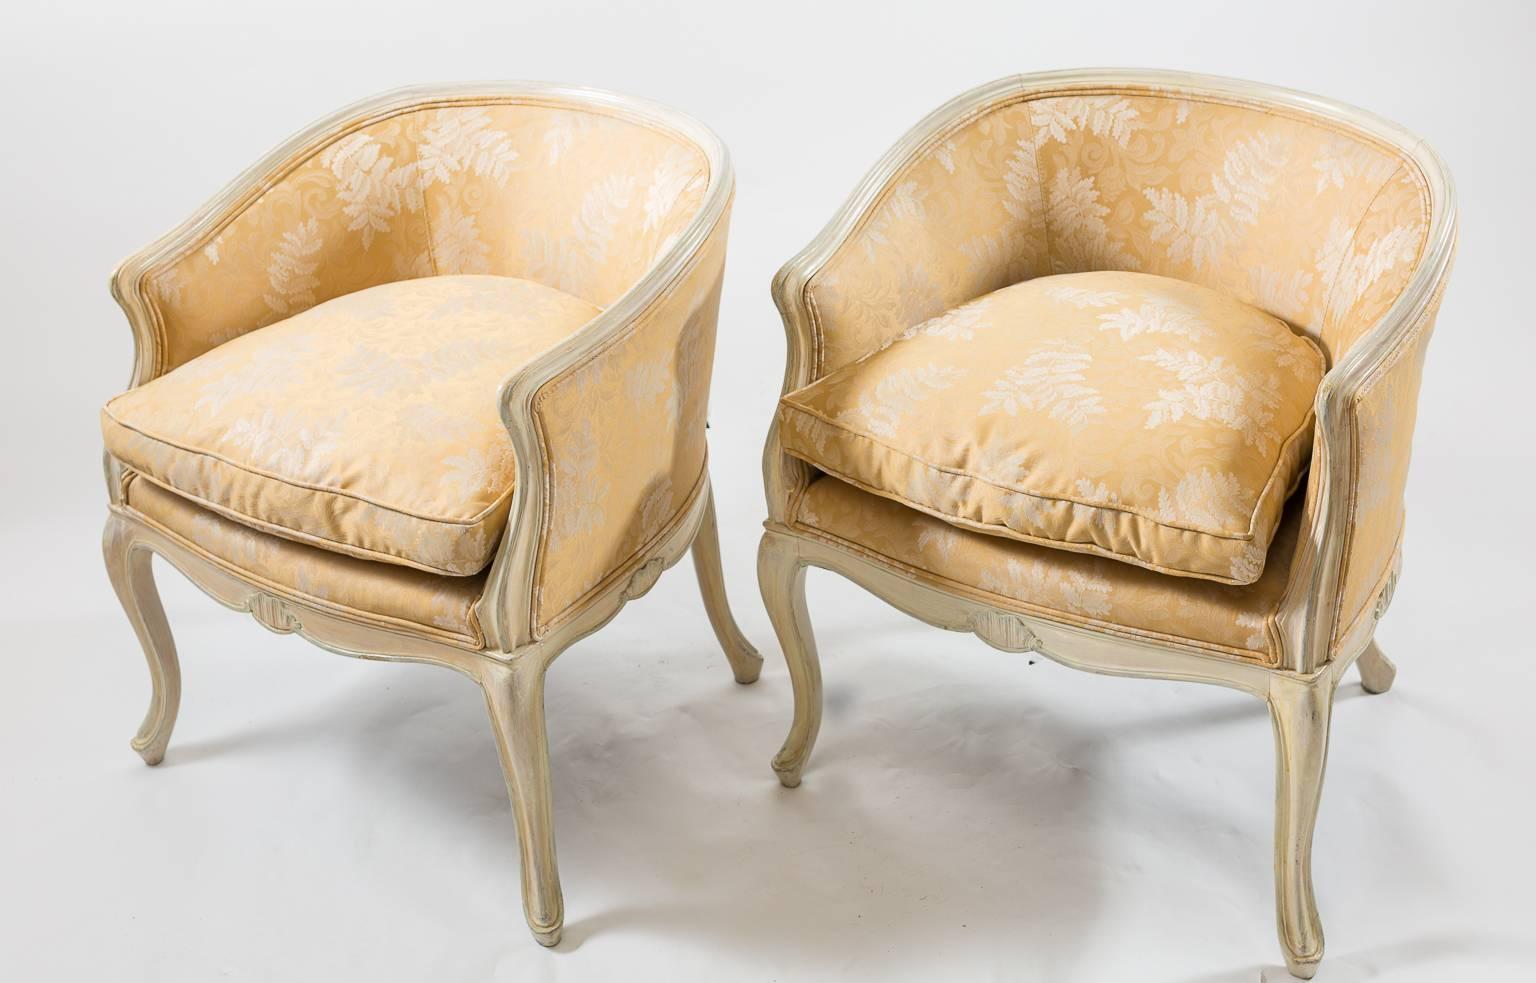 Louis XV chairs, cabriole legs, carved fruitwood cream colored frame with shell motif, beautifully reupholstered (edged ogee) which looks to be pale silk fabric with white fern print on chairs and cushions.